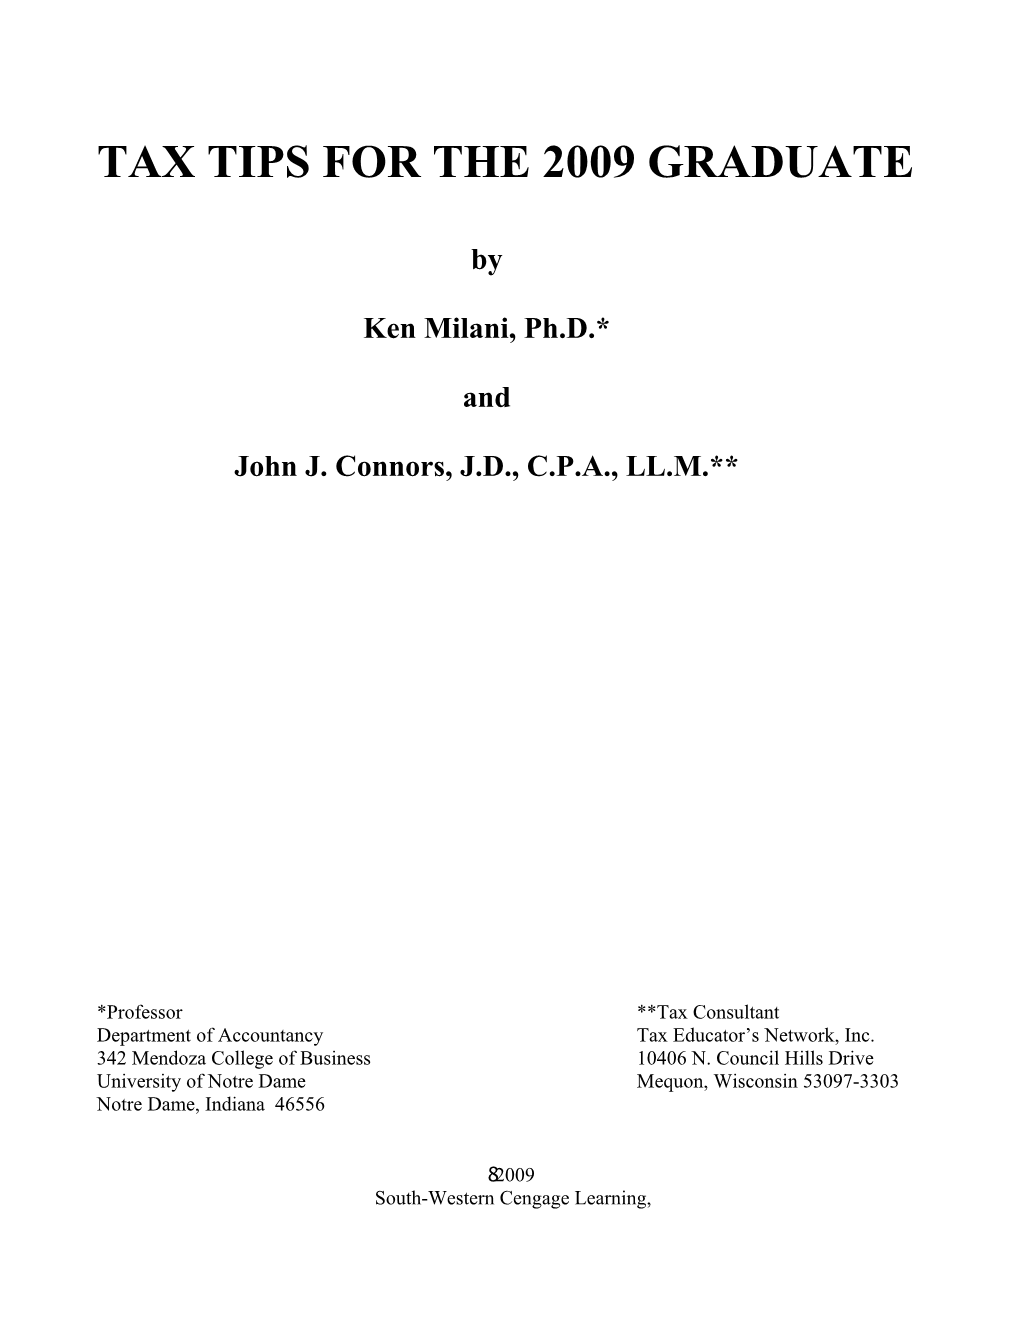 Tax Tips for the 2009 Graduate